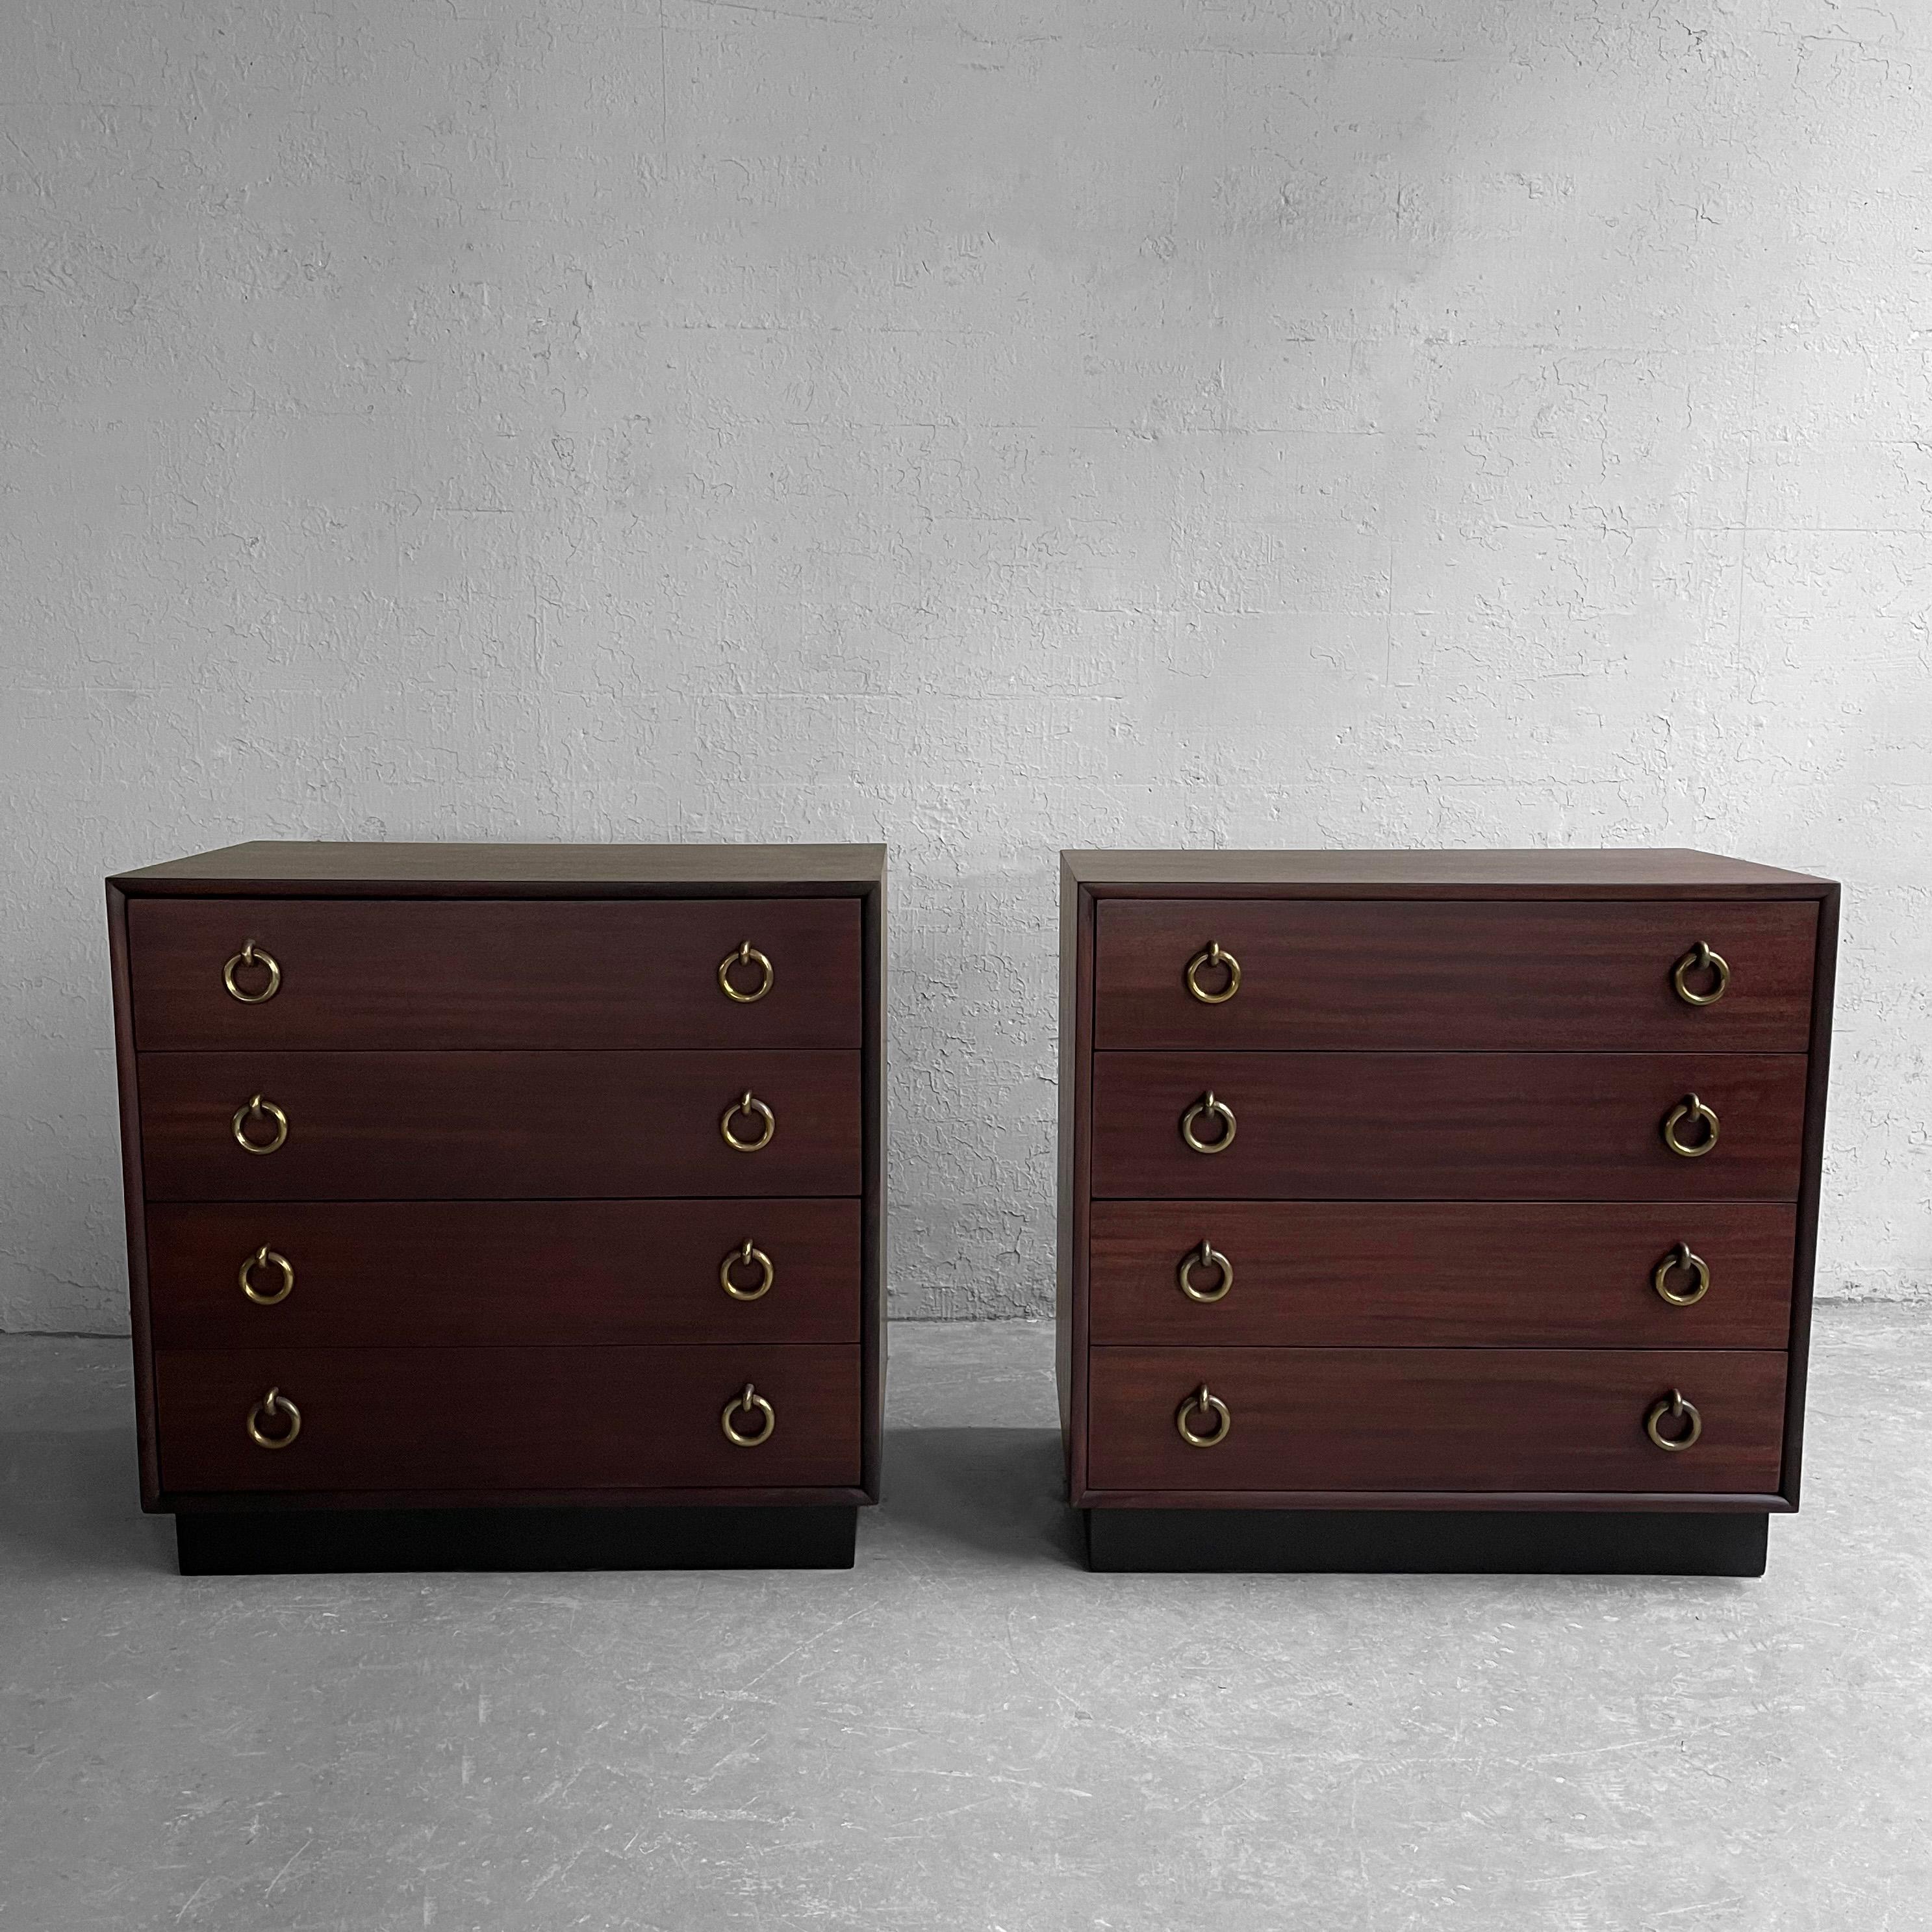 Pair of matched, Hollywood Regency, mahogany, 5 drawer dressers attributed to Gilbert Rohde with prominent brass ring pulls are newly finished in satin rosewood. The drawers measure 6.75